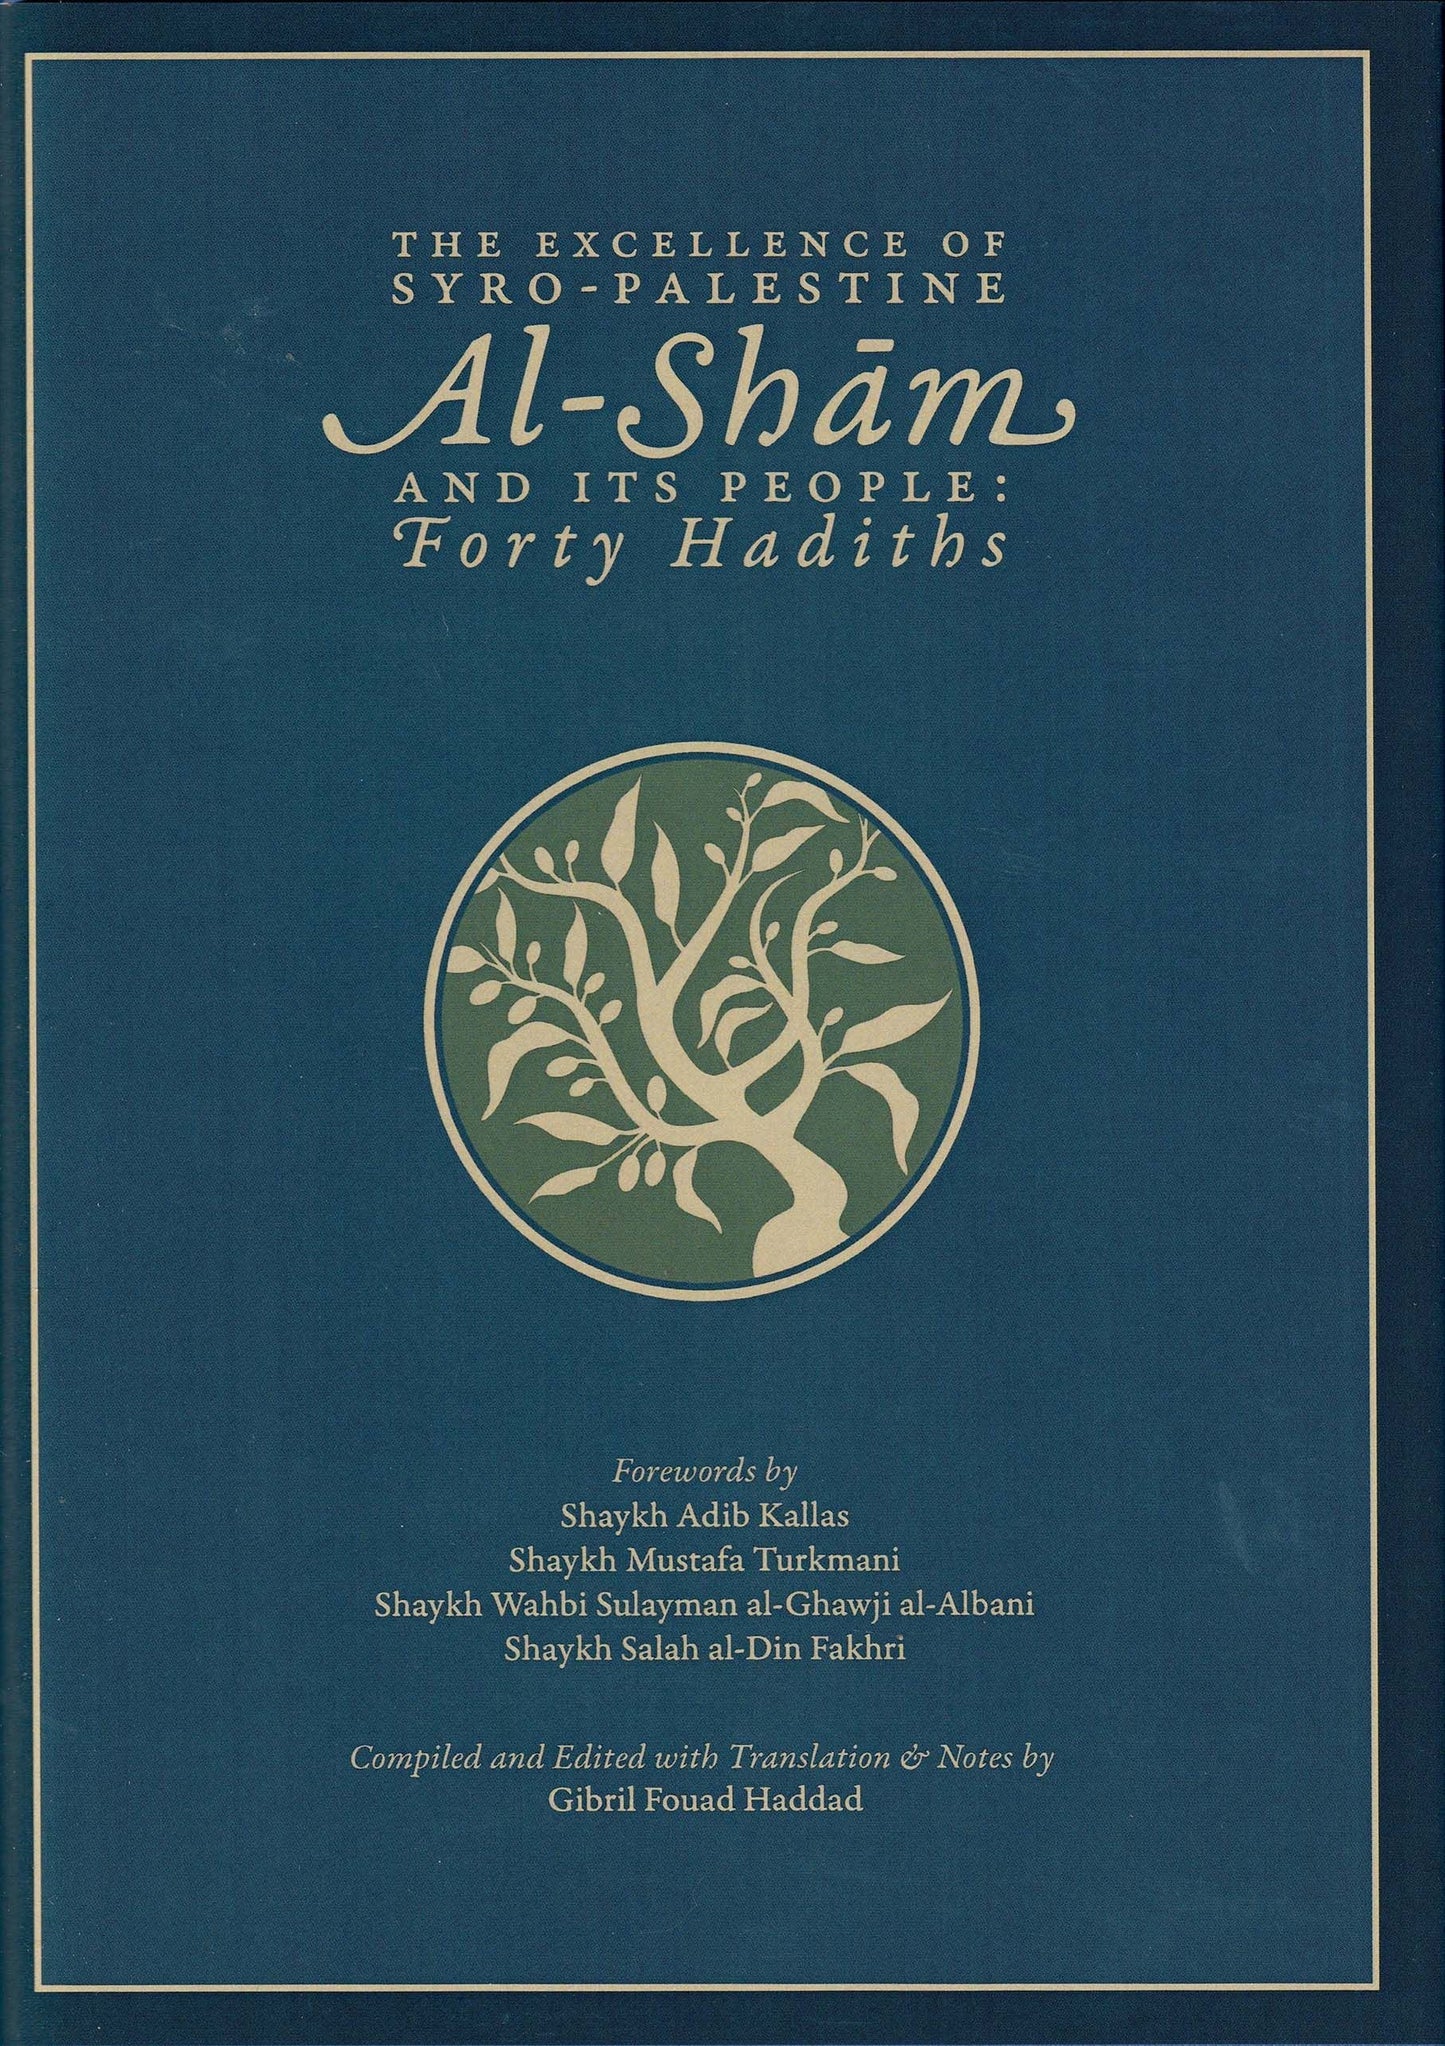 The Excellence of Syro-Palestine ~ Al-Sham and its People: Forty Hadith